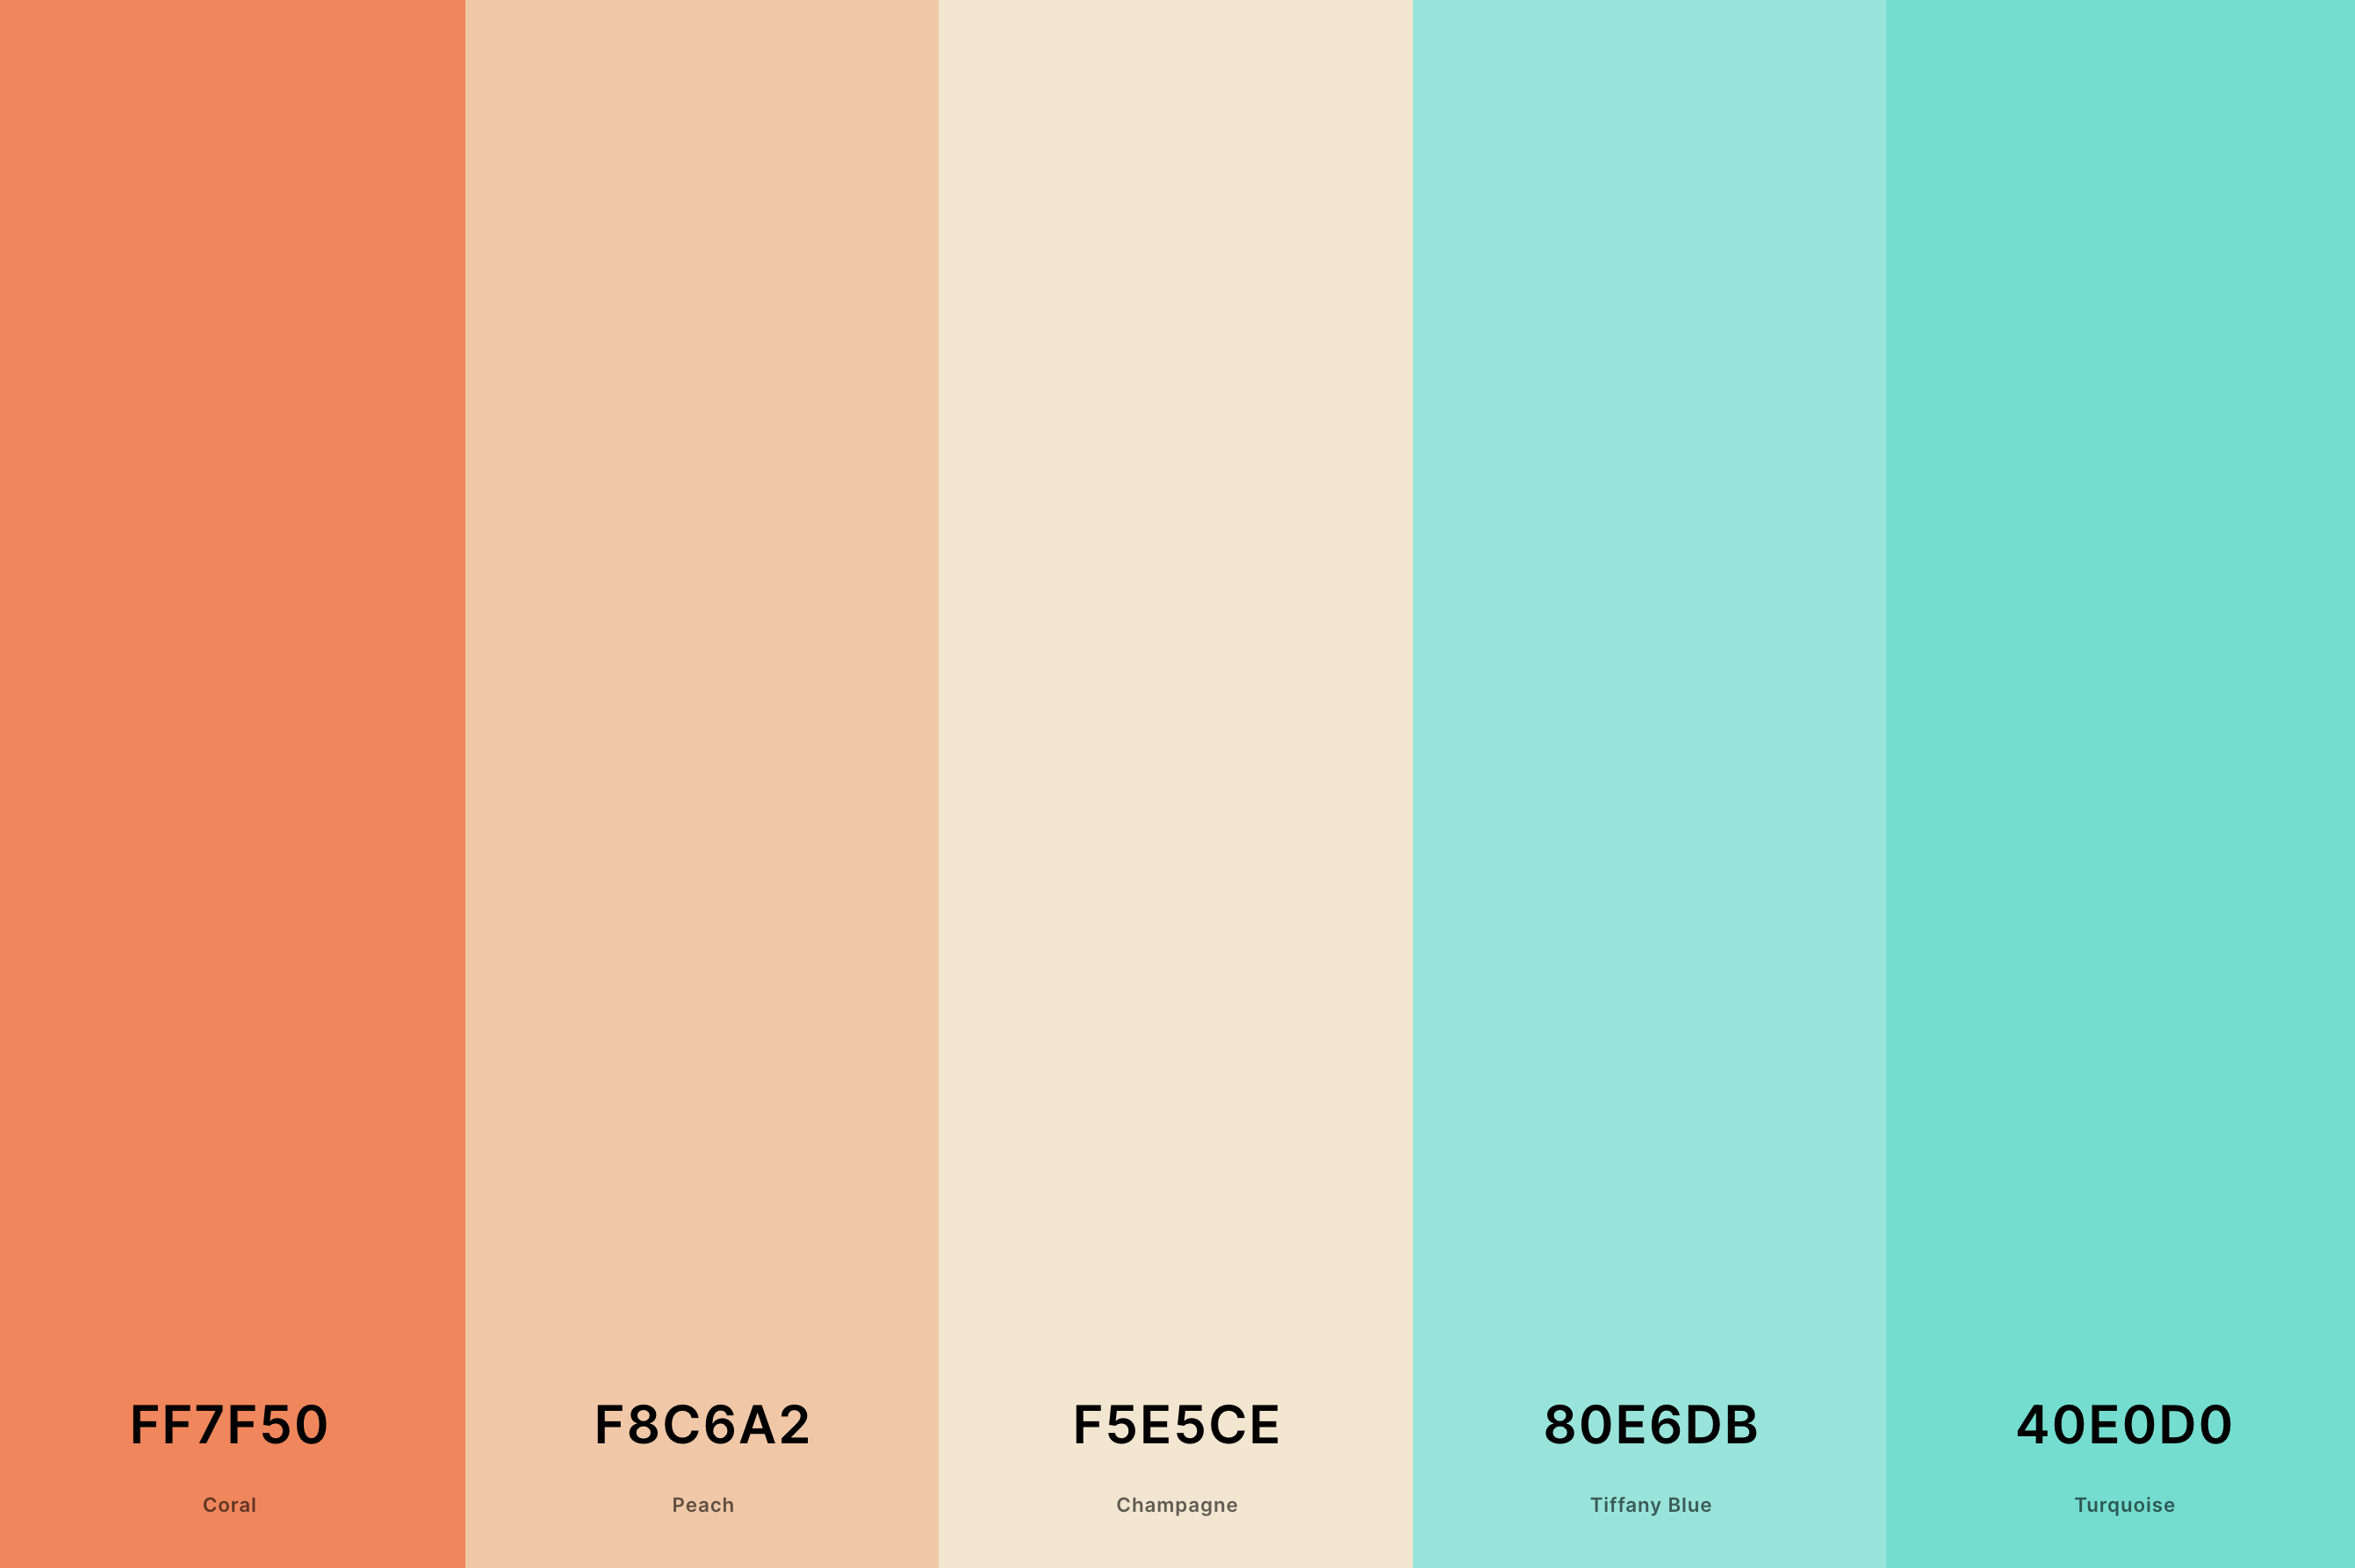 12. Coral And Turquoise Color Palette Color Palette with Coral (Hex #FF7F50) + Peach (Hex #F8C6A2) + Champagne (Hex #F5E5CE) + Tiffany Blue (Hex #80E6DB) + Turquoise (Hex #40E0D0) Color Palette with Hex Codes